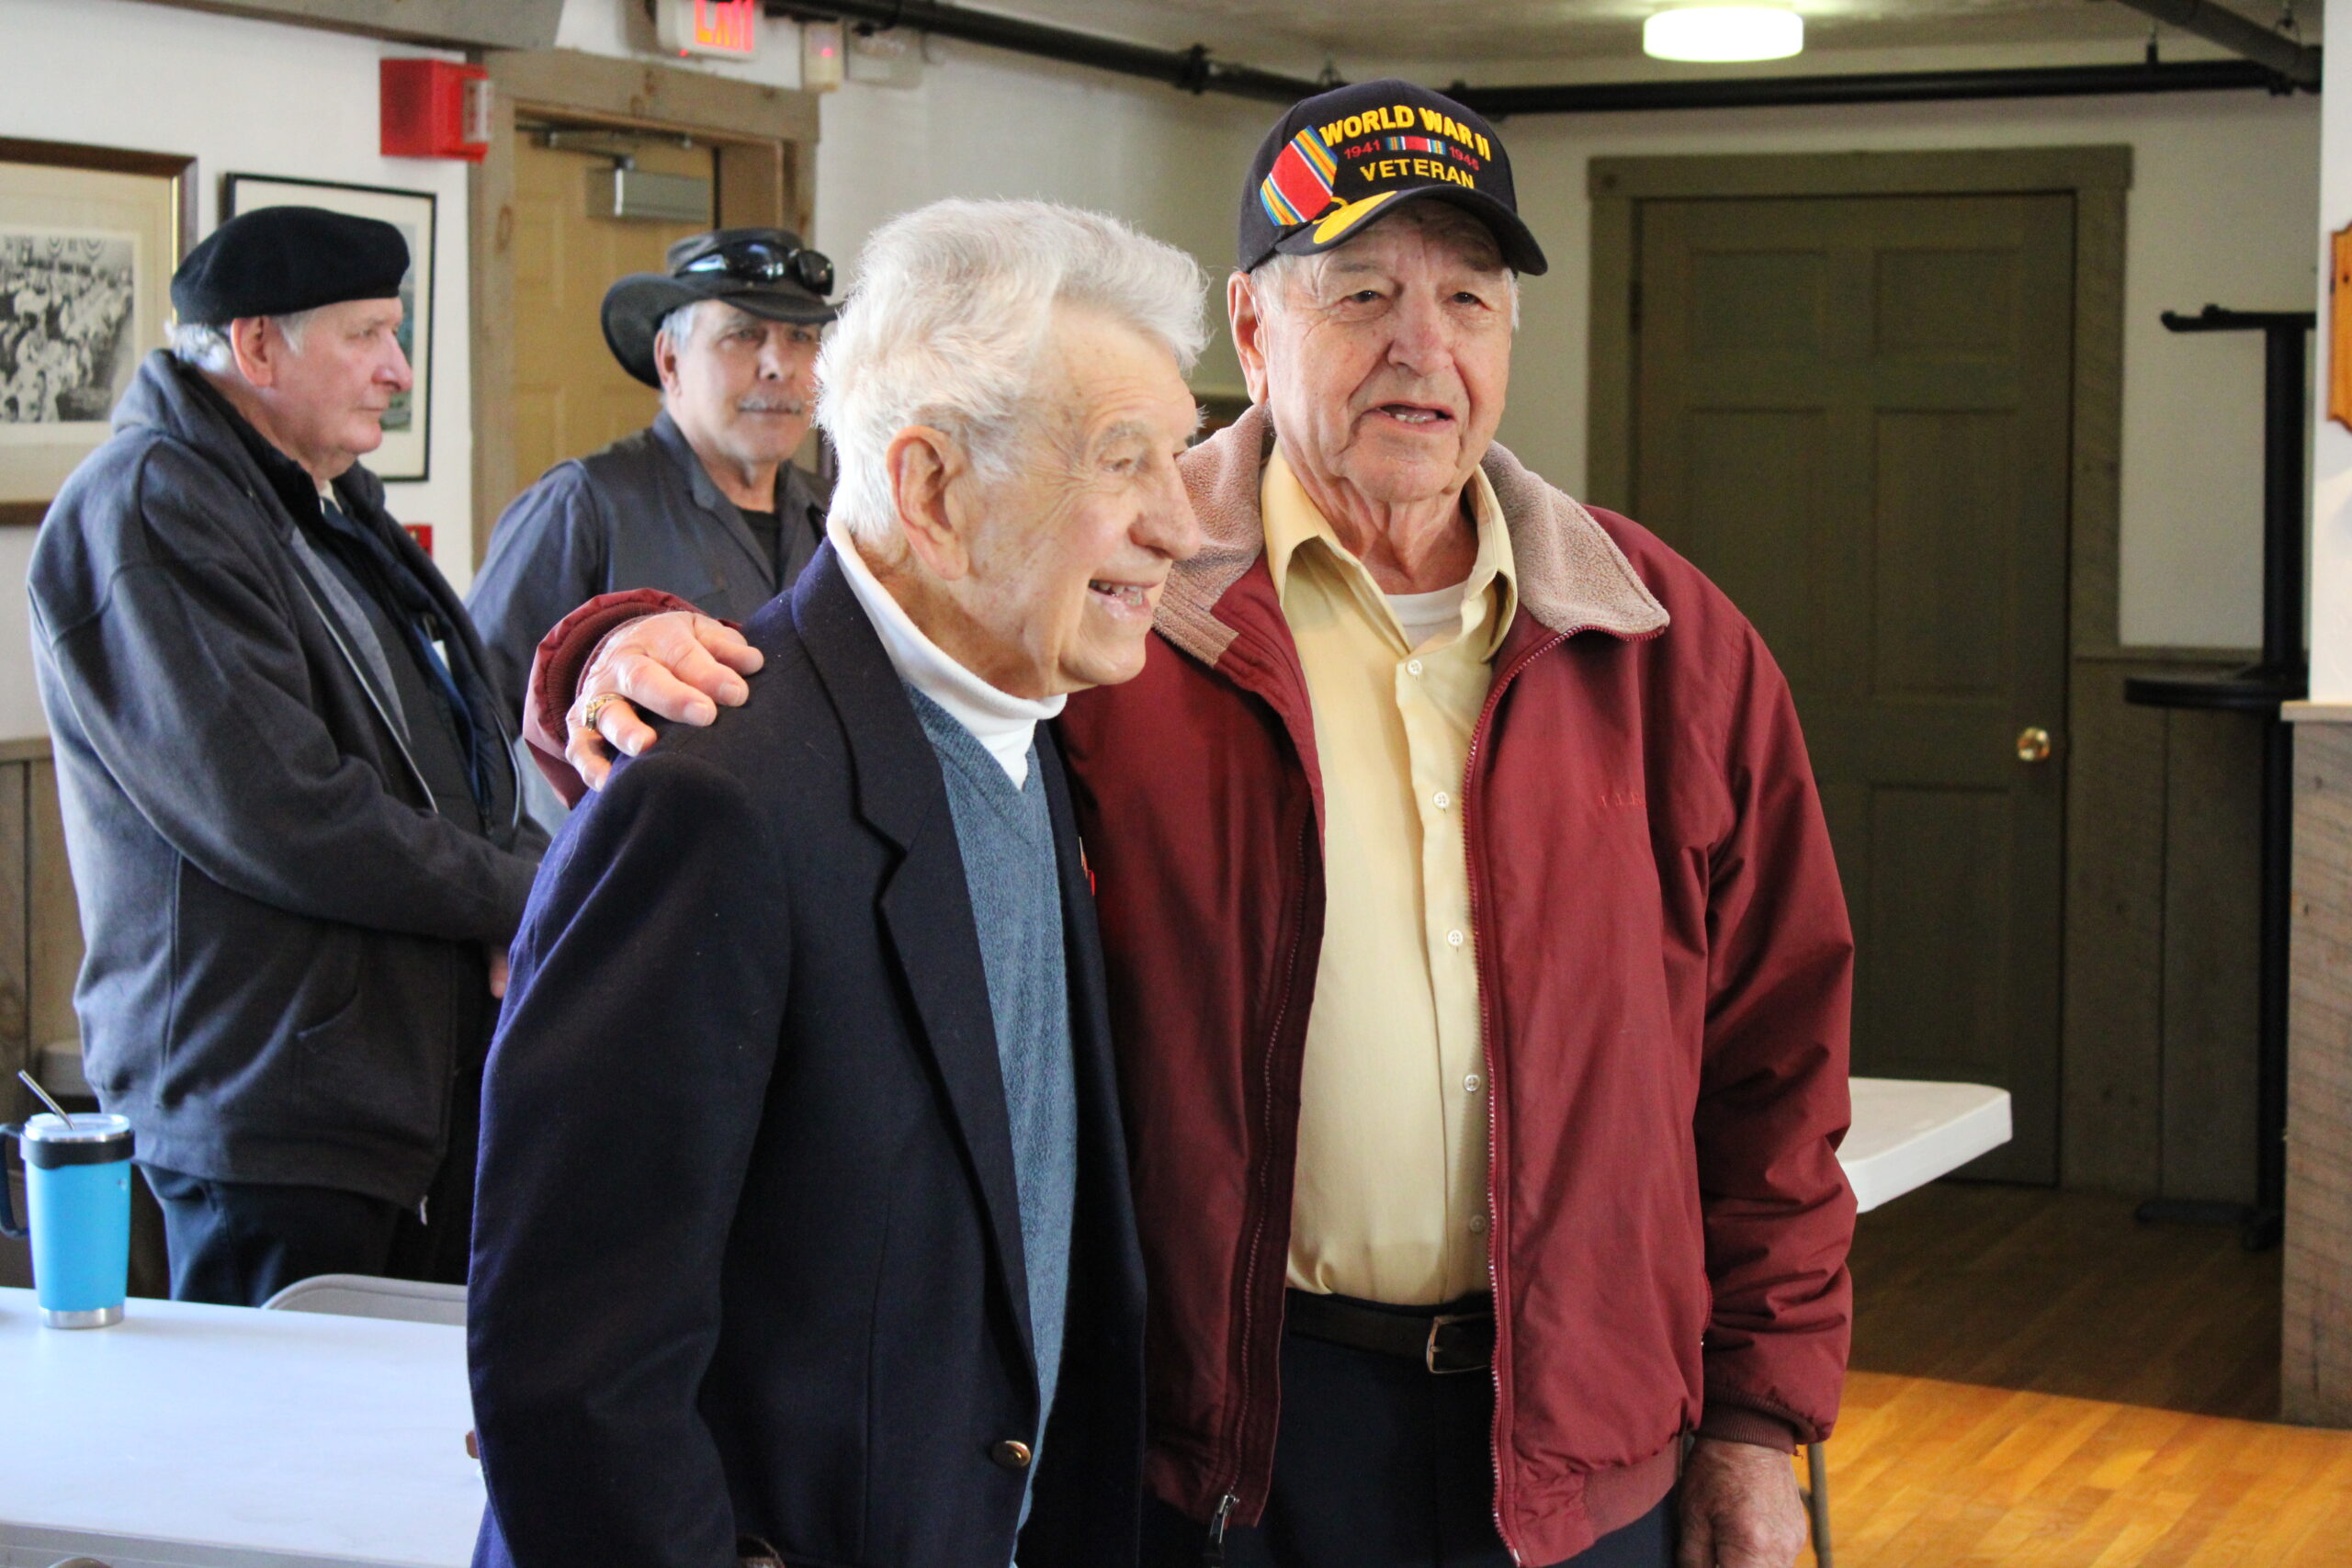 A pair of World War II veterans -- Victor A. “Perry” Sacco, who served in the Army, and Frank Brown Jr., who served in the Navy. Photo/Maureen Sullivan